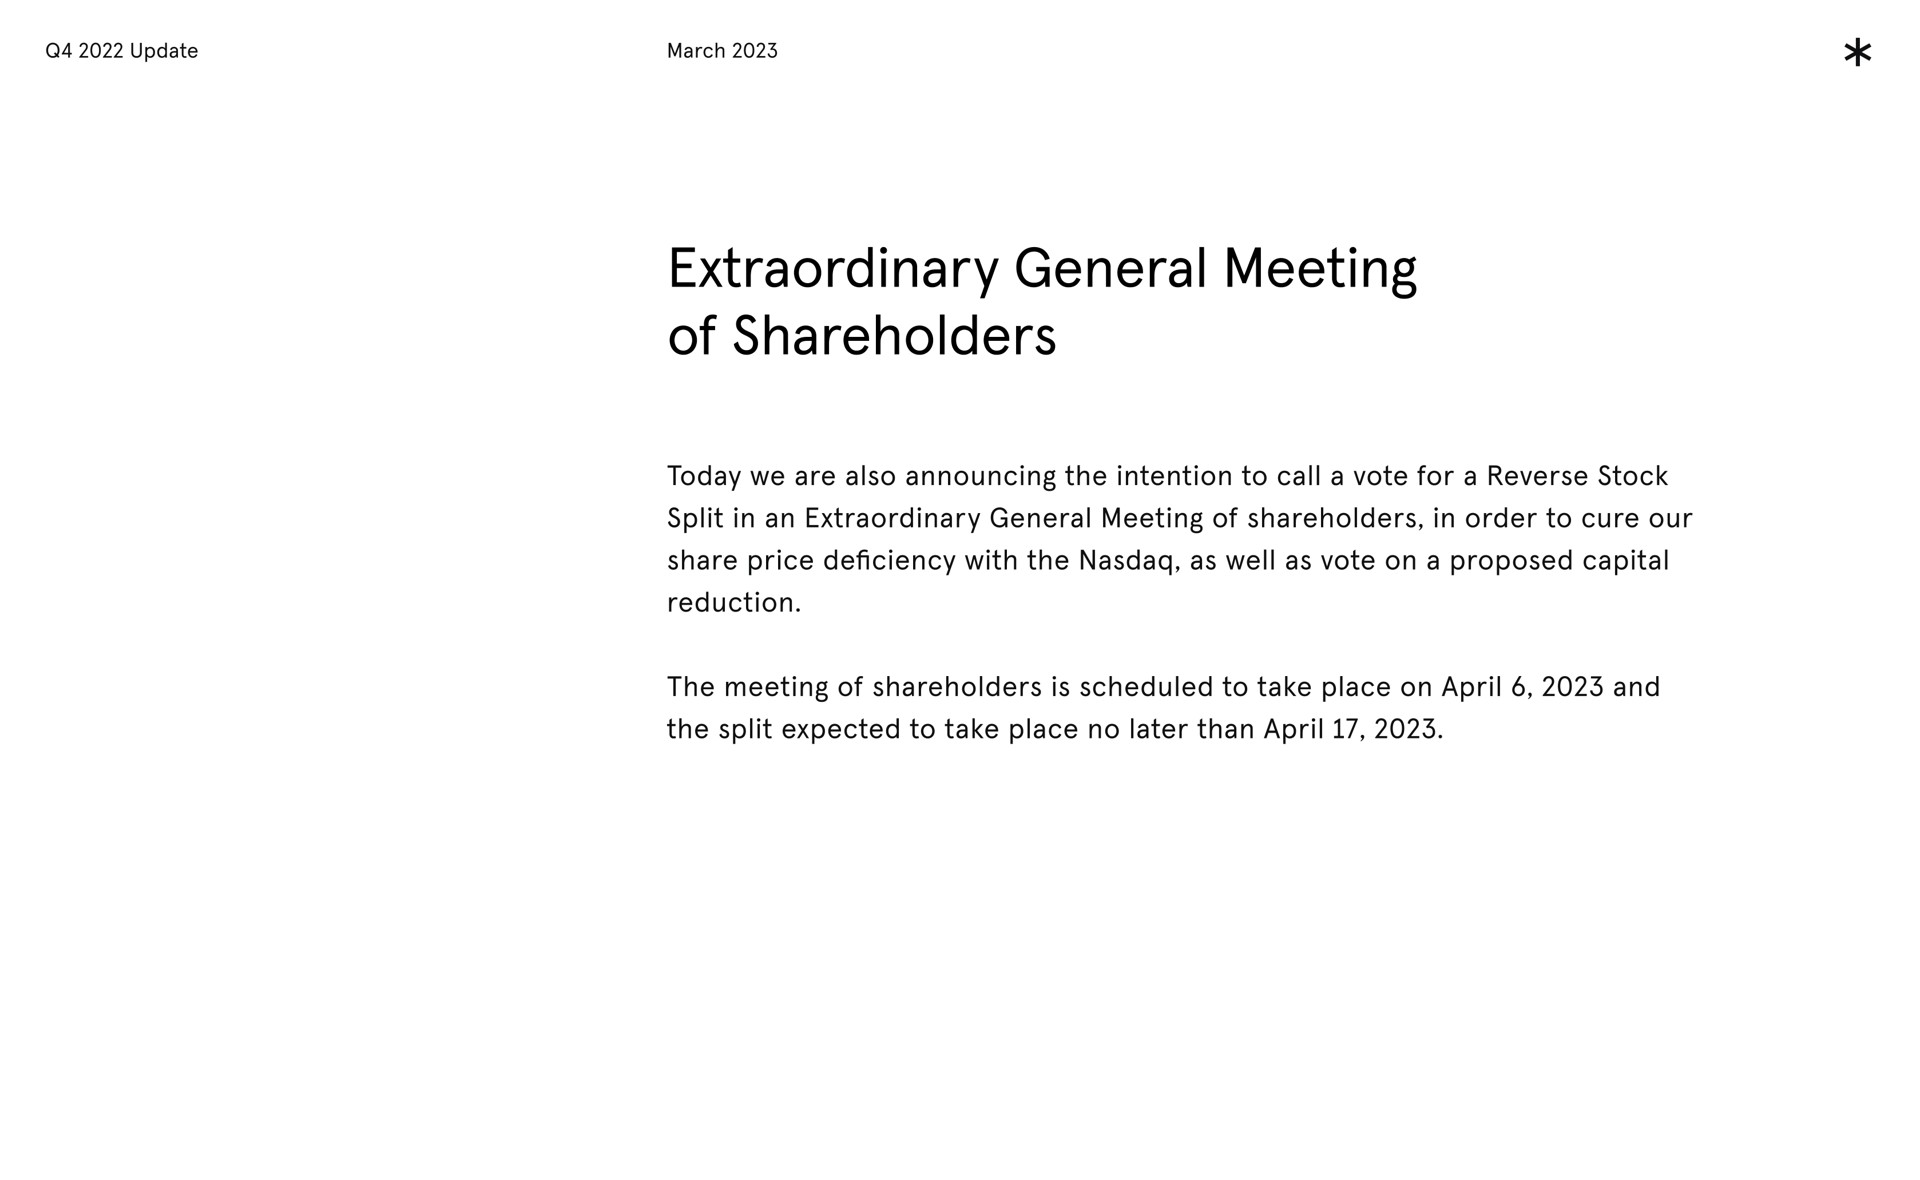 extraordinary general meeting of shareholders today are also announcing the intention to call a for a stock split in an extraordinary general meeting of shareholders in order to cure our share price the as ell as on a proposed capital reduction the of shareholders is scheduled to take place on and the split expected to take place no later than we vote reverse deficiency with well vote | Arrival